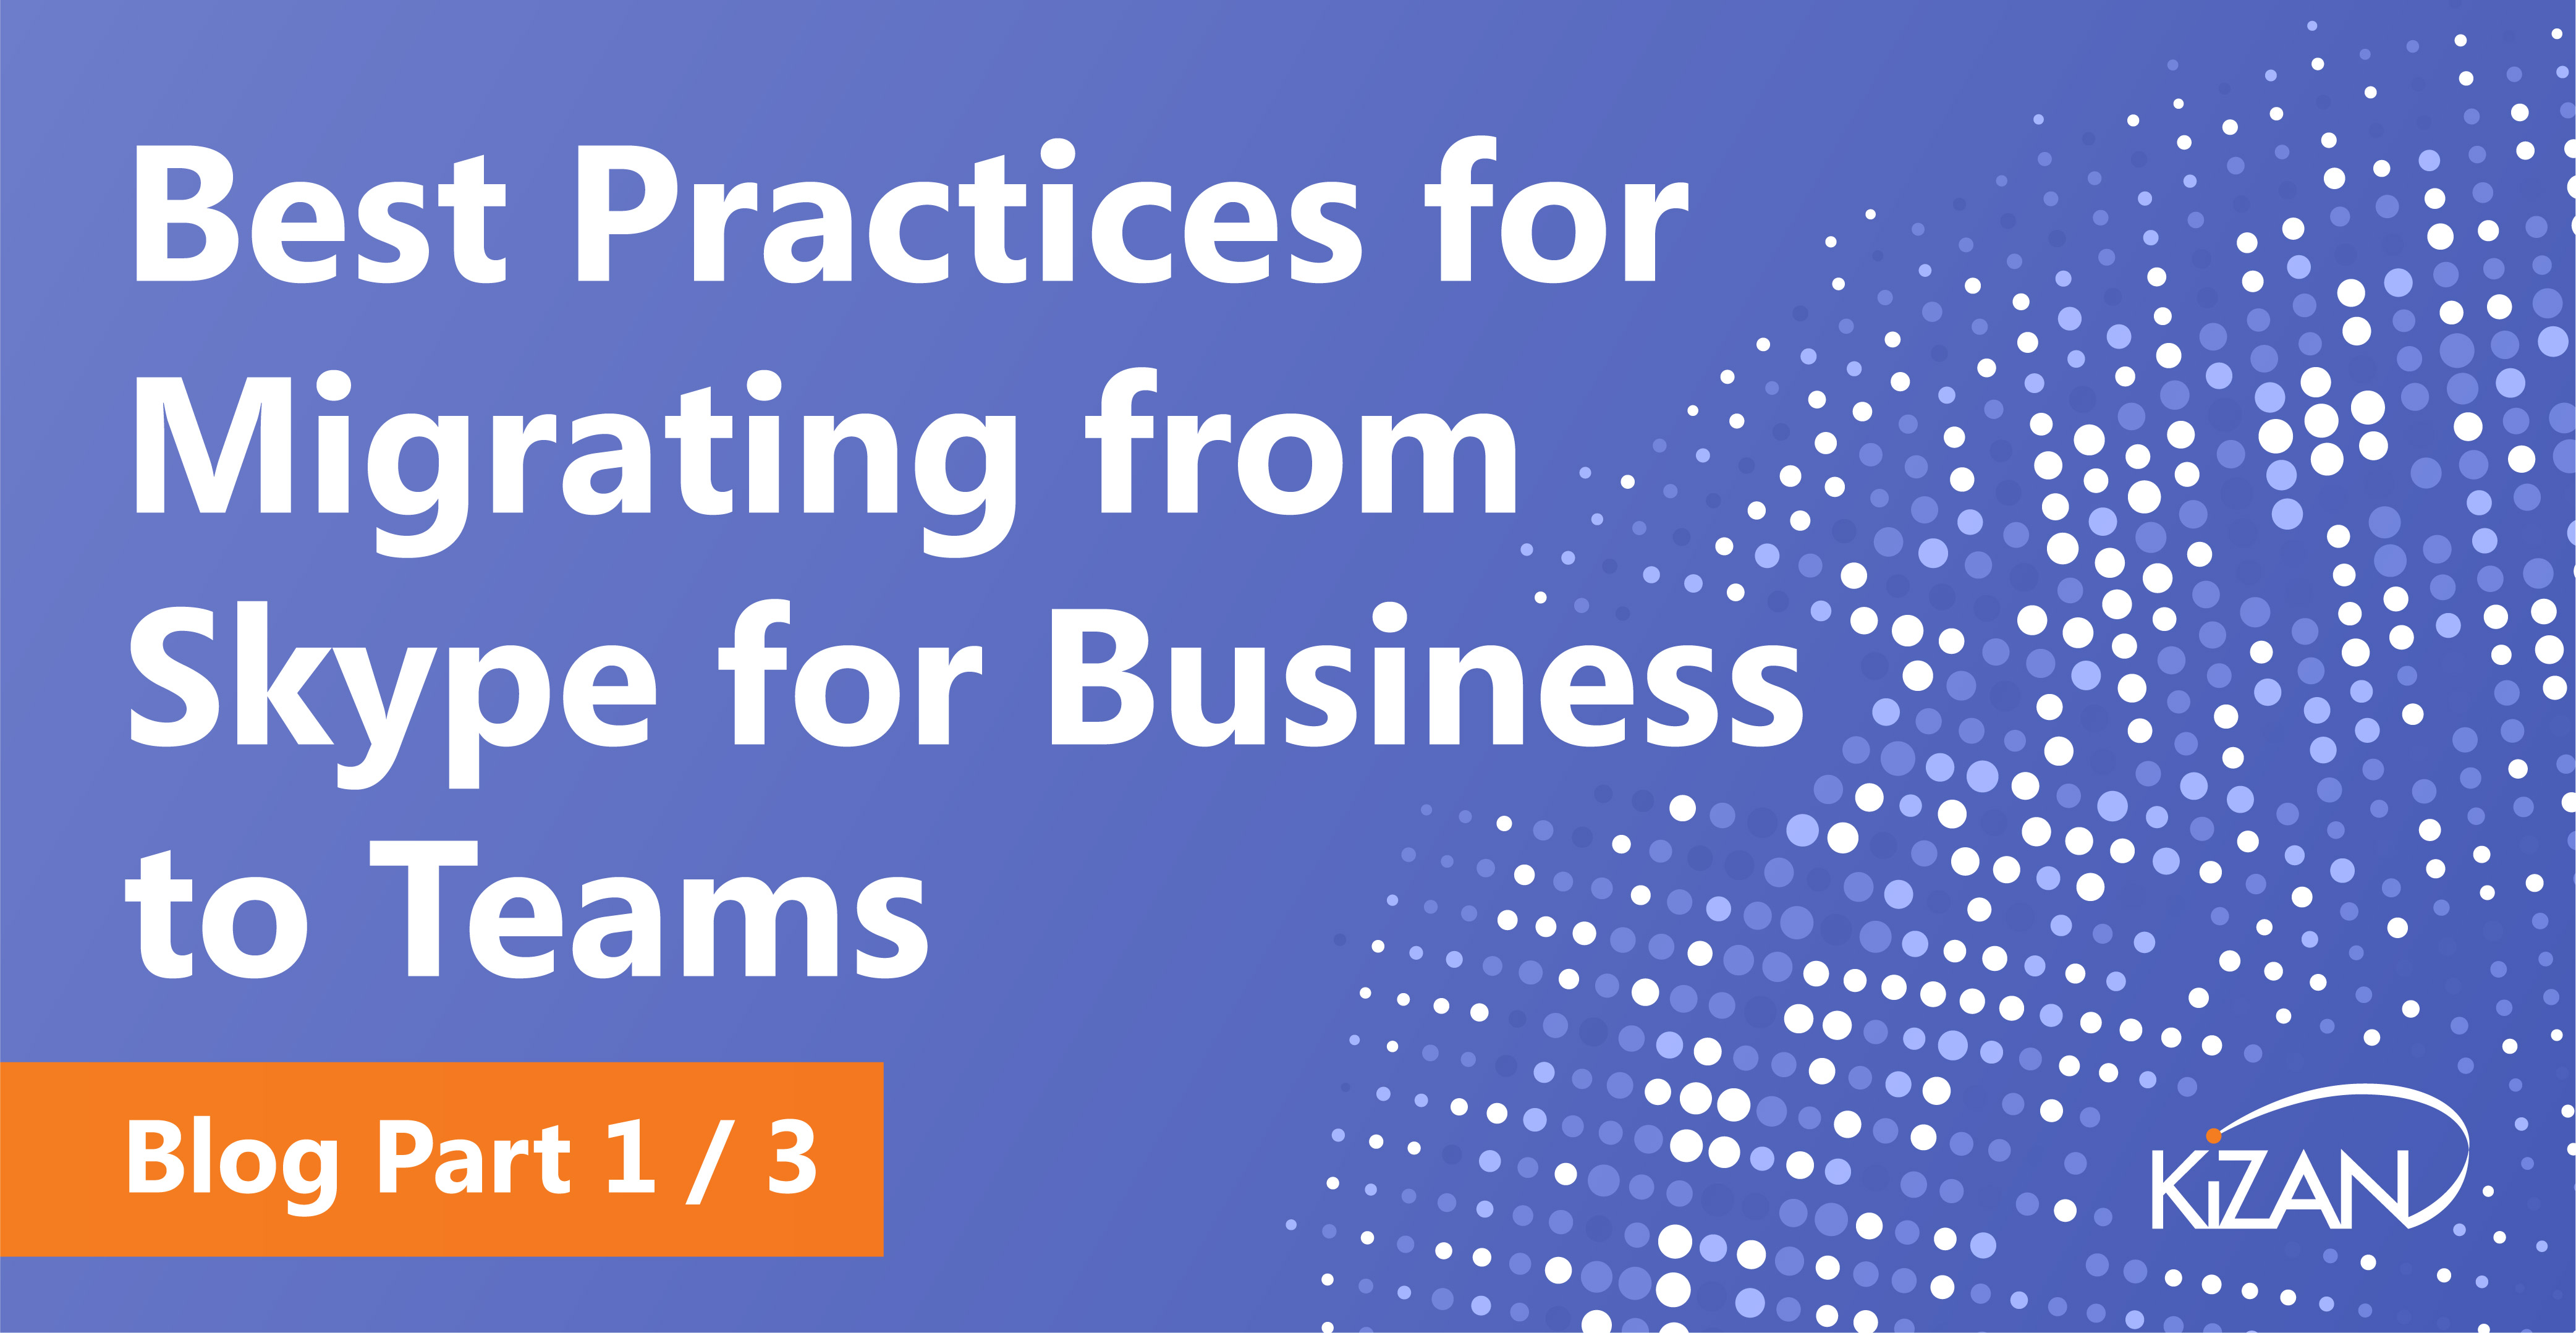 Best Practices for Migrating from Skype for Business to Teams Blog Part 1